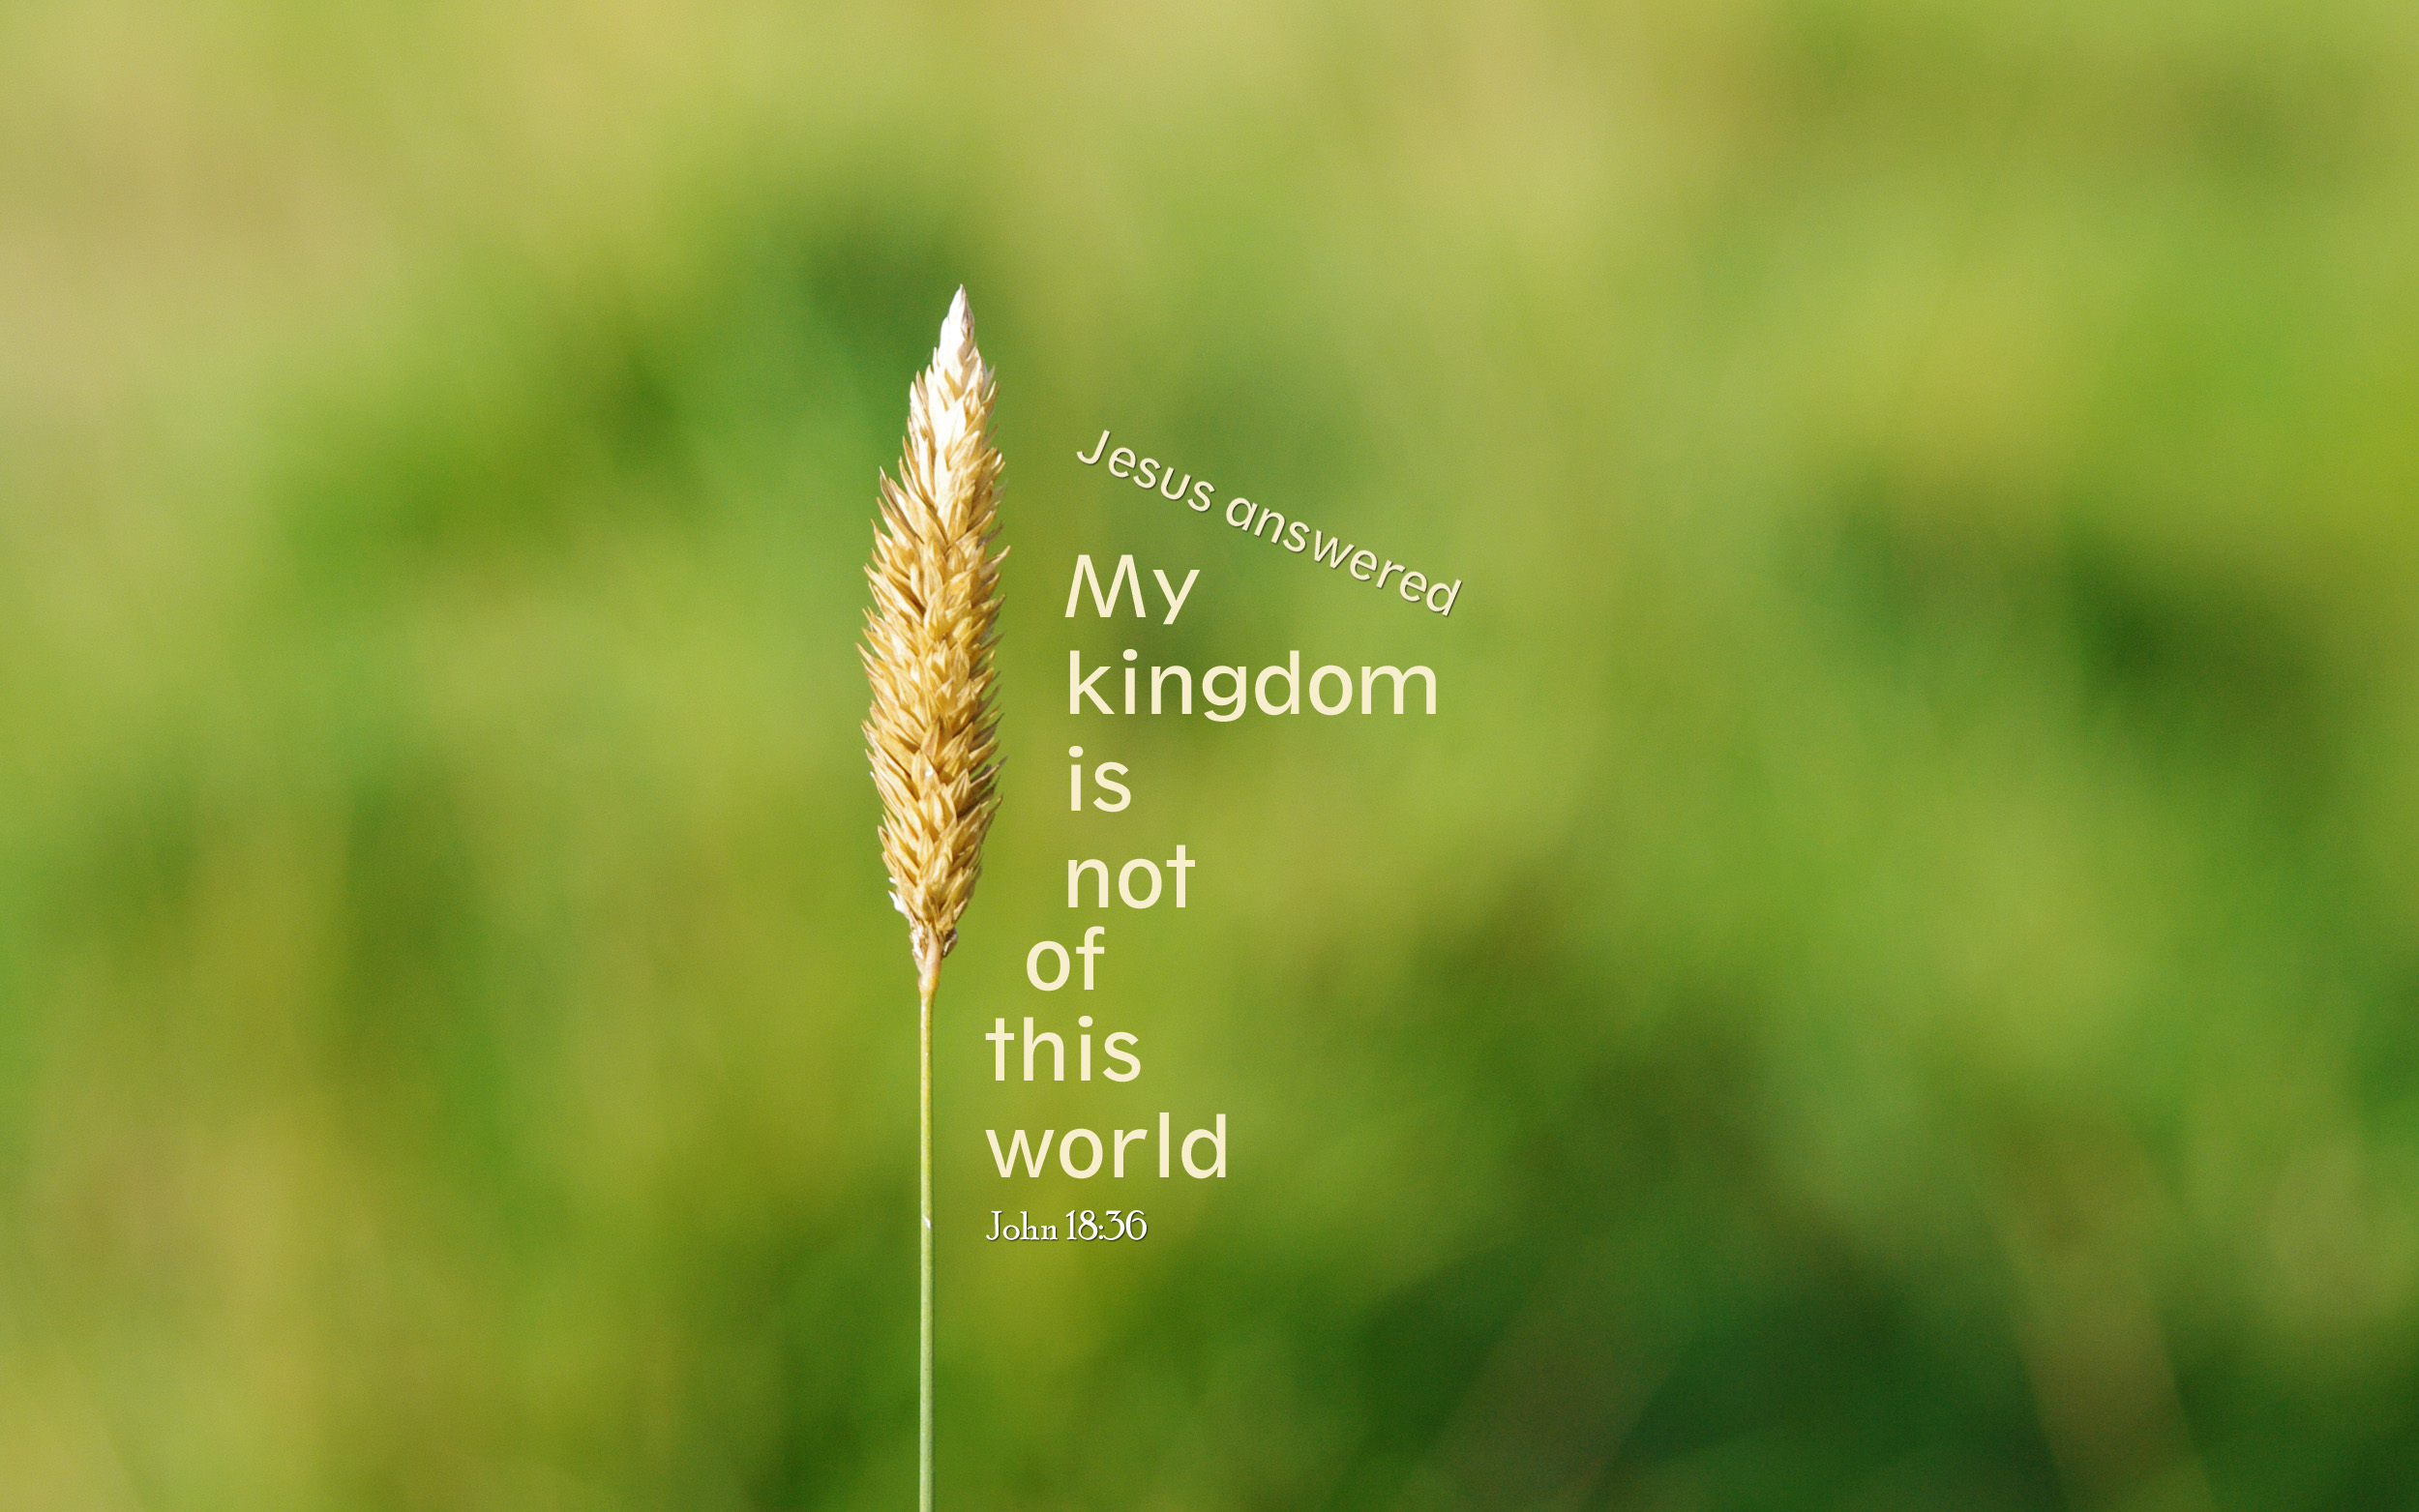 My kingdom is not of this world.